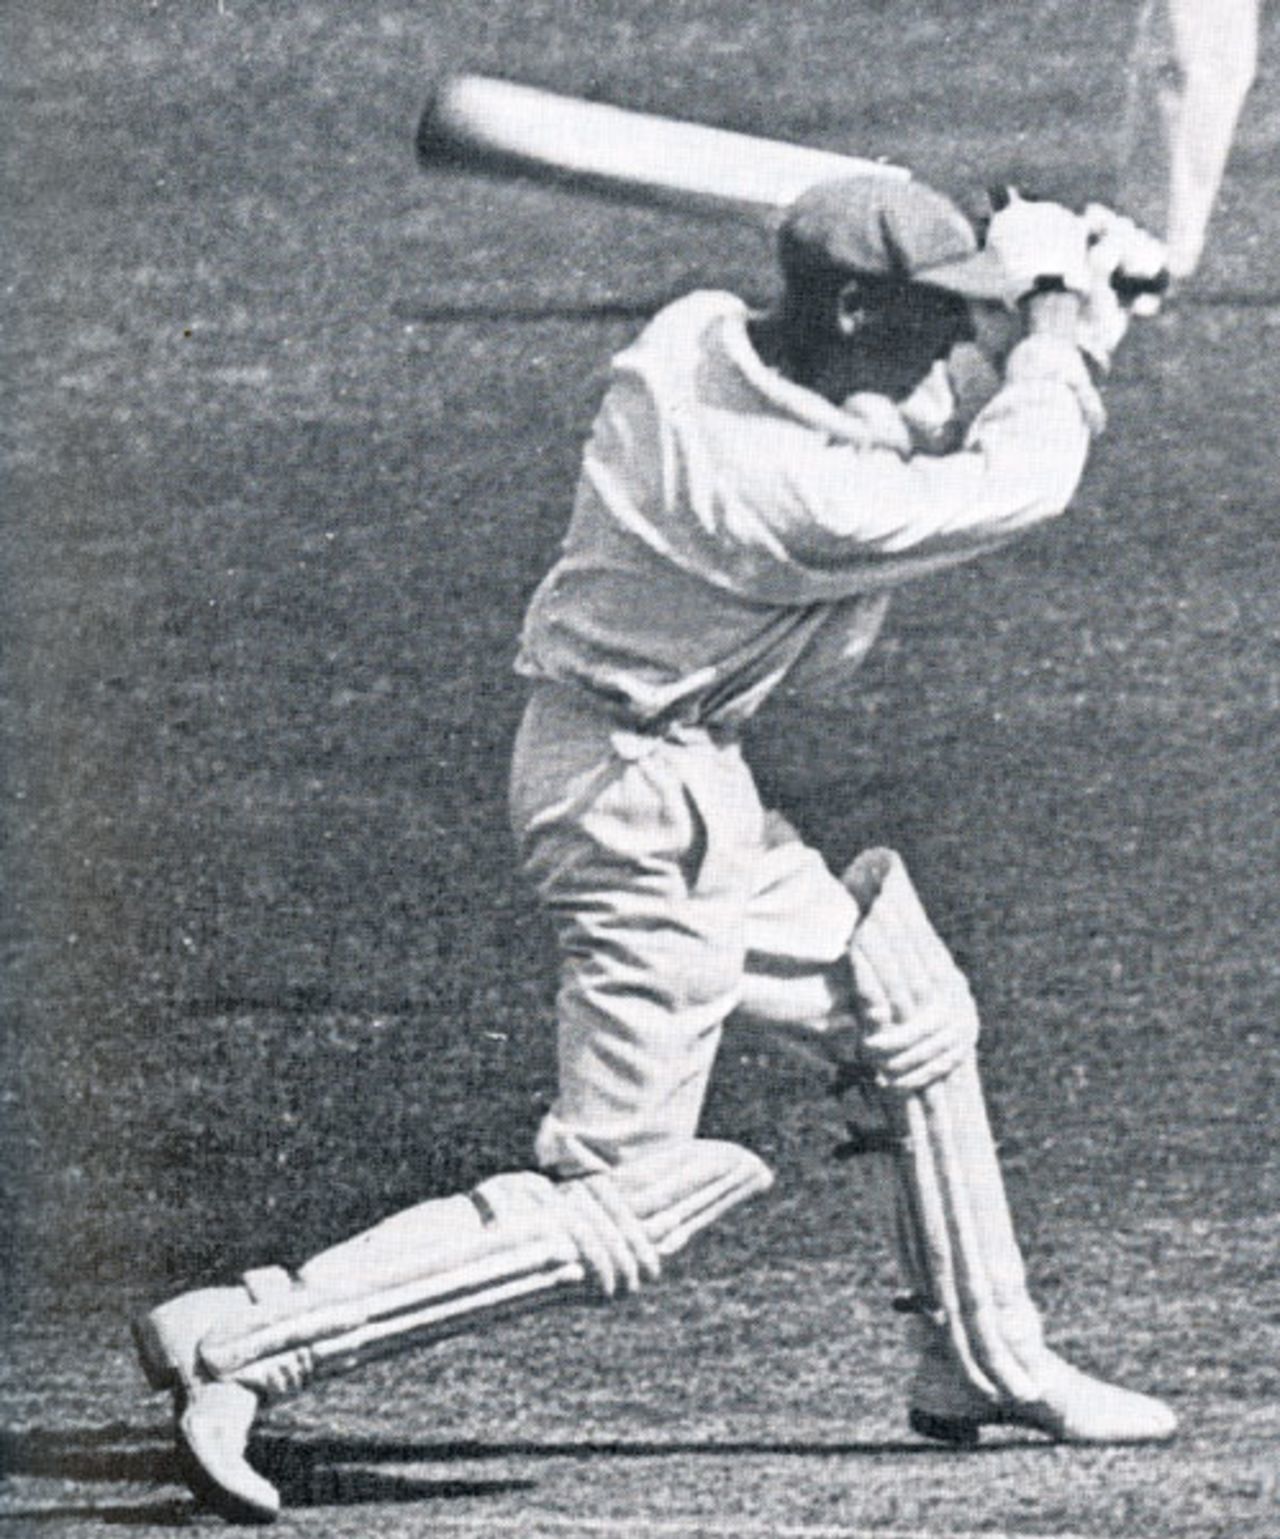 Archie Jackson batting for New South Wales, November 12, 1928